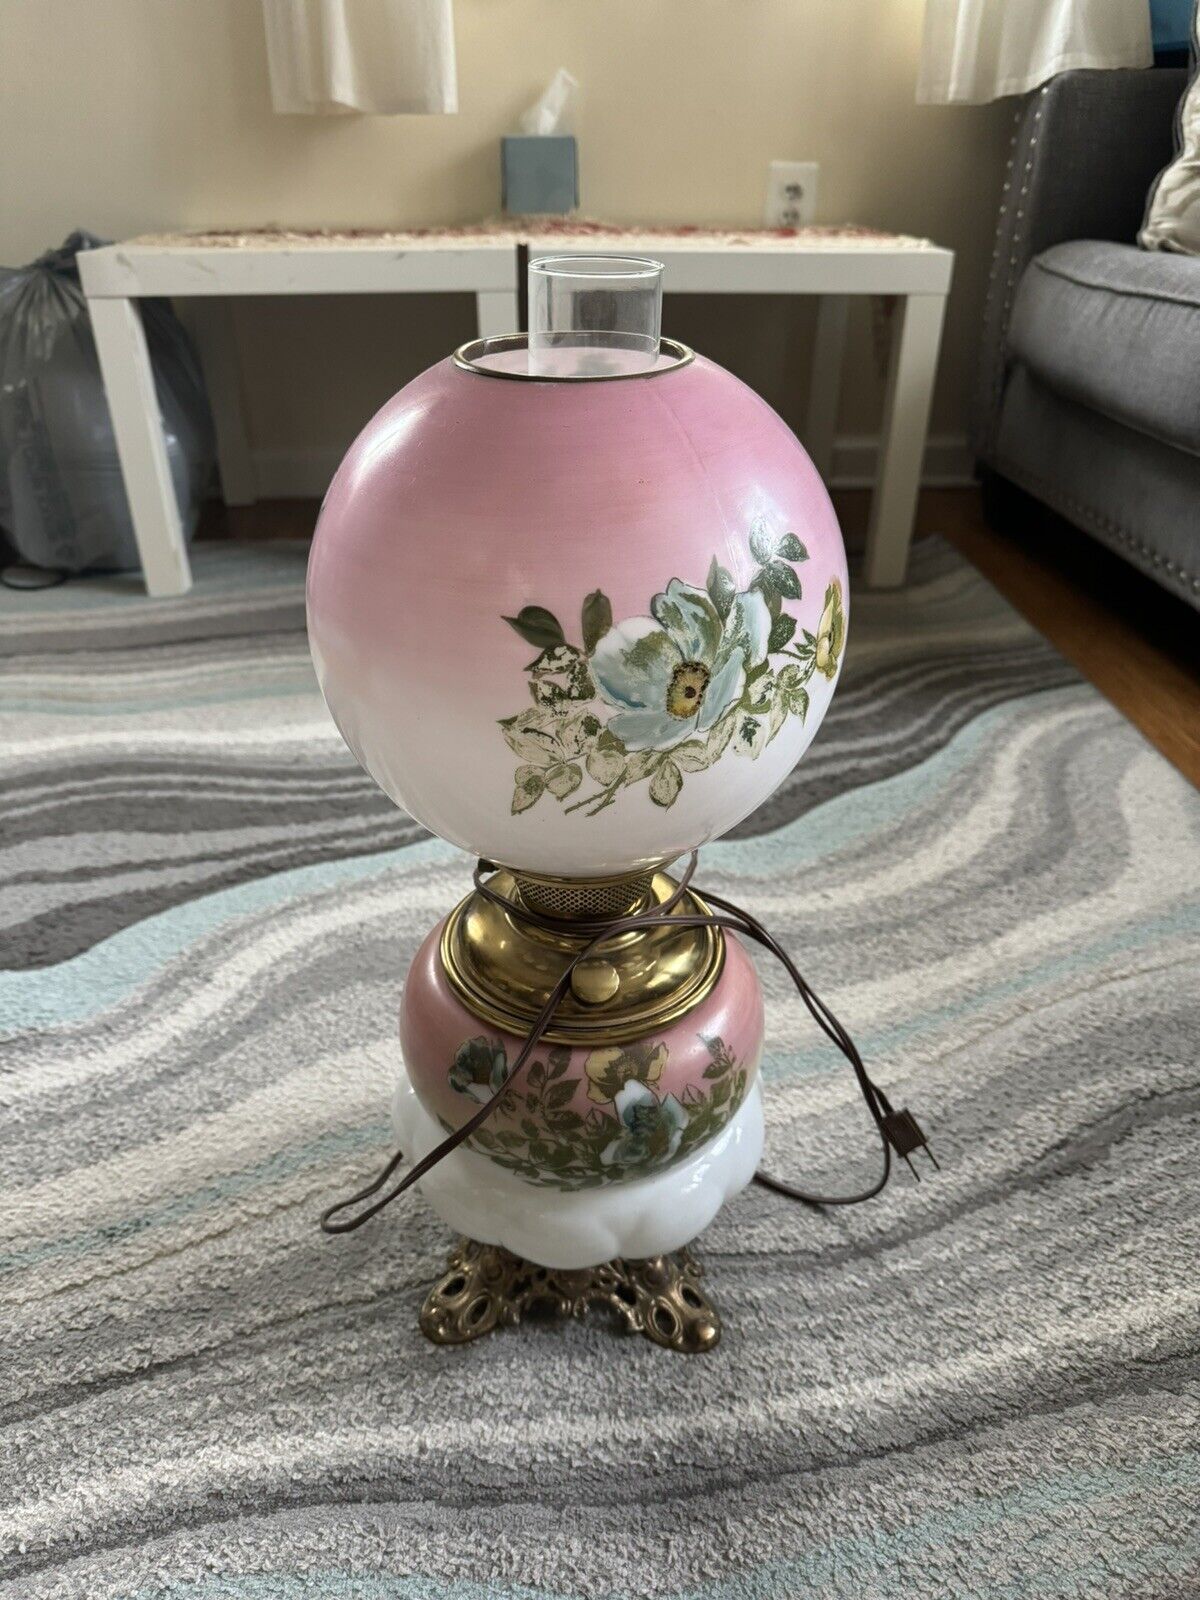 Antique ORNATE Victorian Banquet/Electric Parlor Lamp. Pink Flowers.